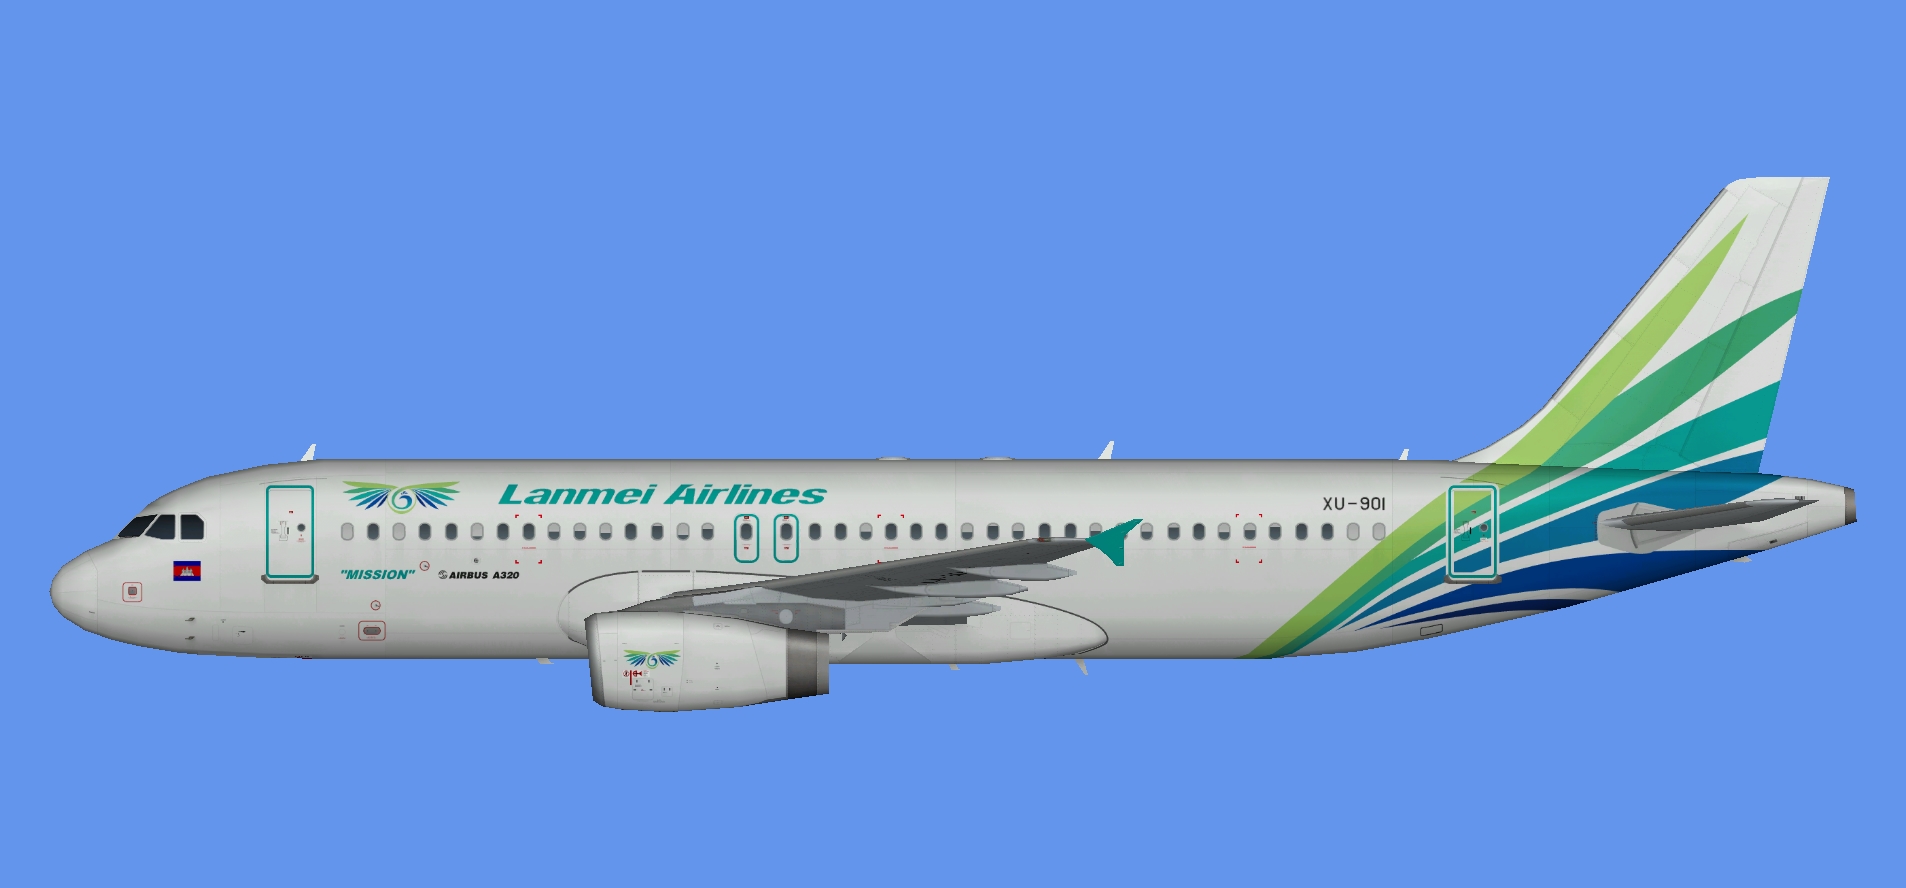 Lanmei Airlines Airbus A320